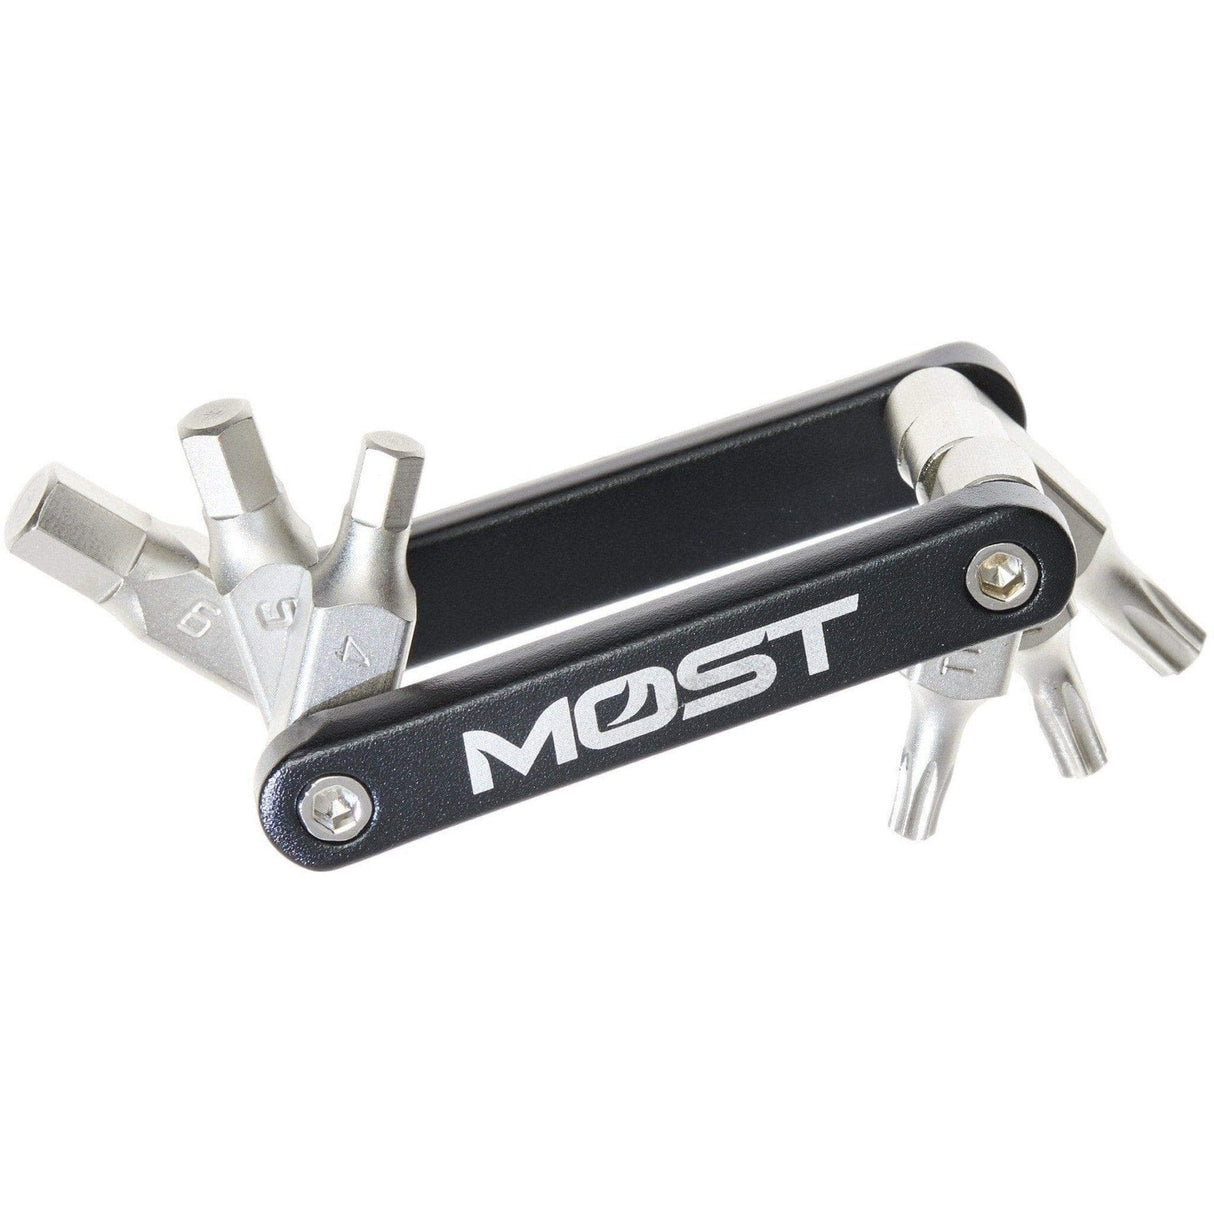 MOST Most Iron 6 Multitool | Strictly Bicycles 